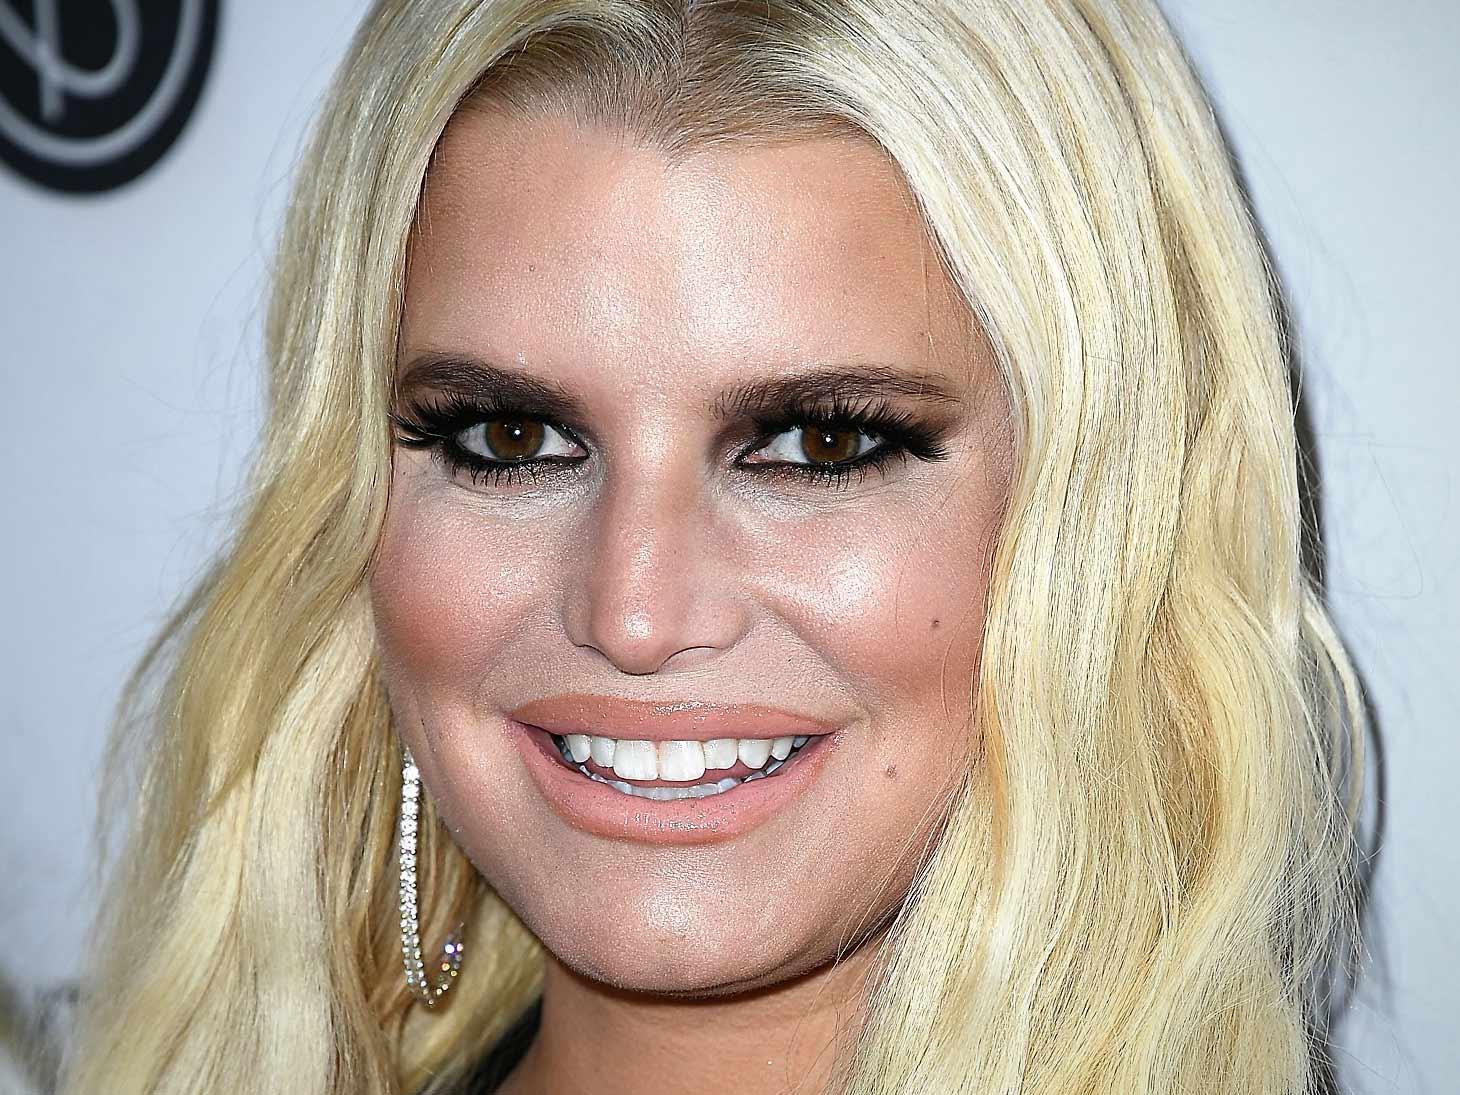 Jessica Simpson Settles $12 Million Battle With Alleged Con Man Over Sale of Her Fashion Company